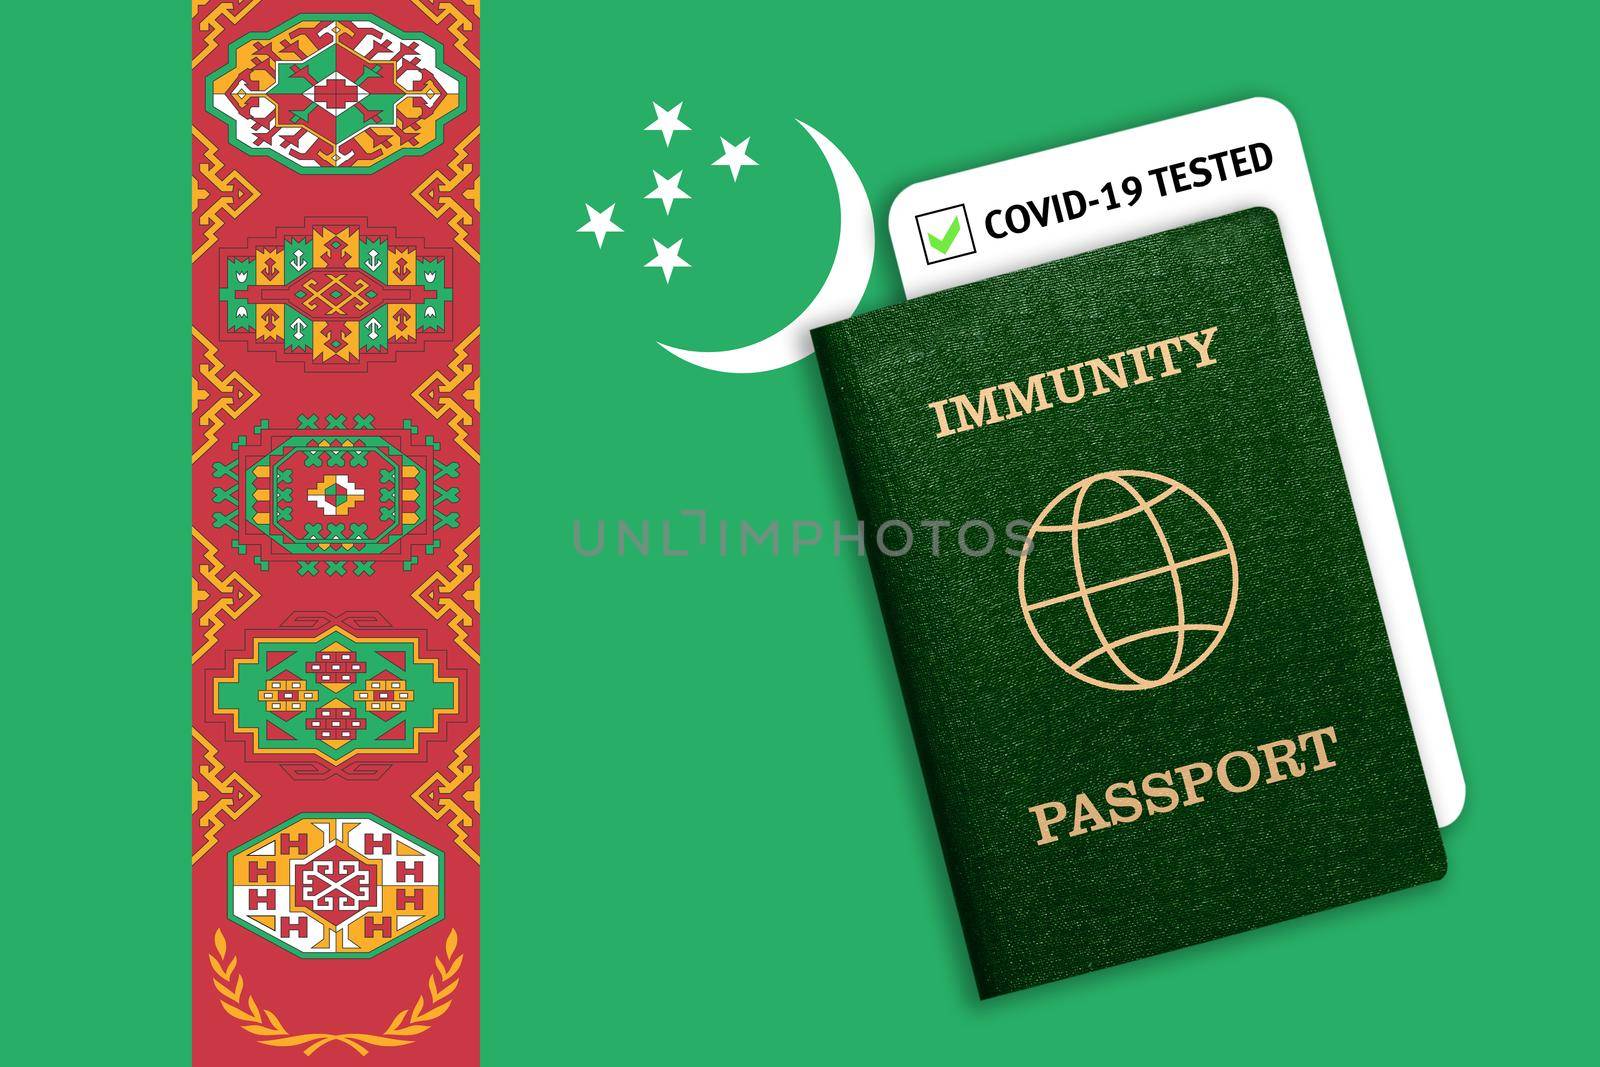 Concept of Immunity passport, certificate for traveling after pandemic for people who have had coronavirus or made vaccine and test result for COVID-19 on flag of Turkmenistan